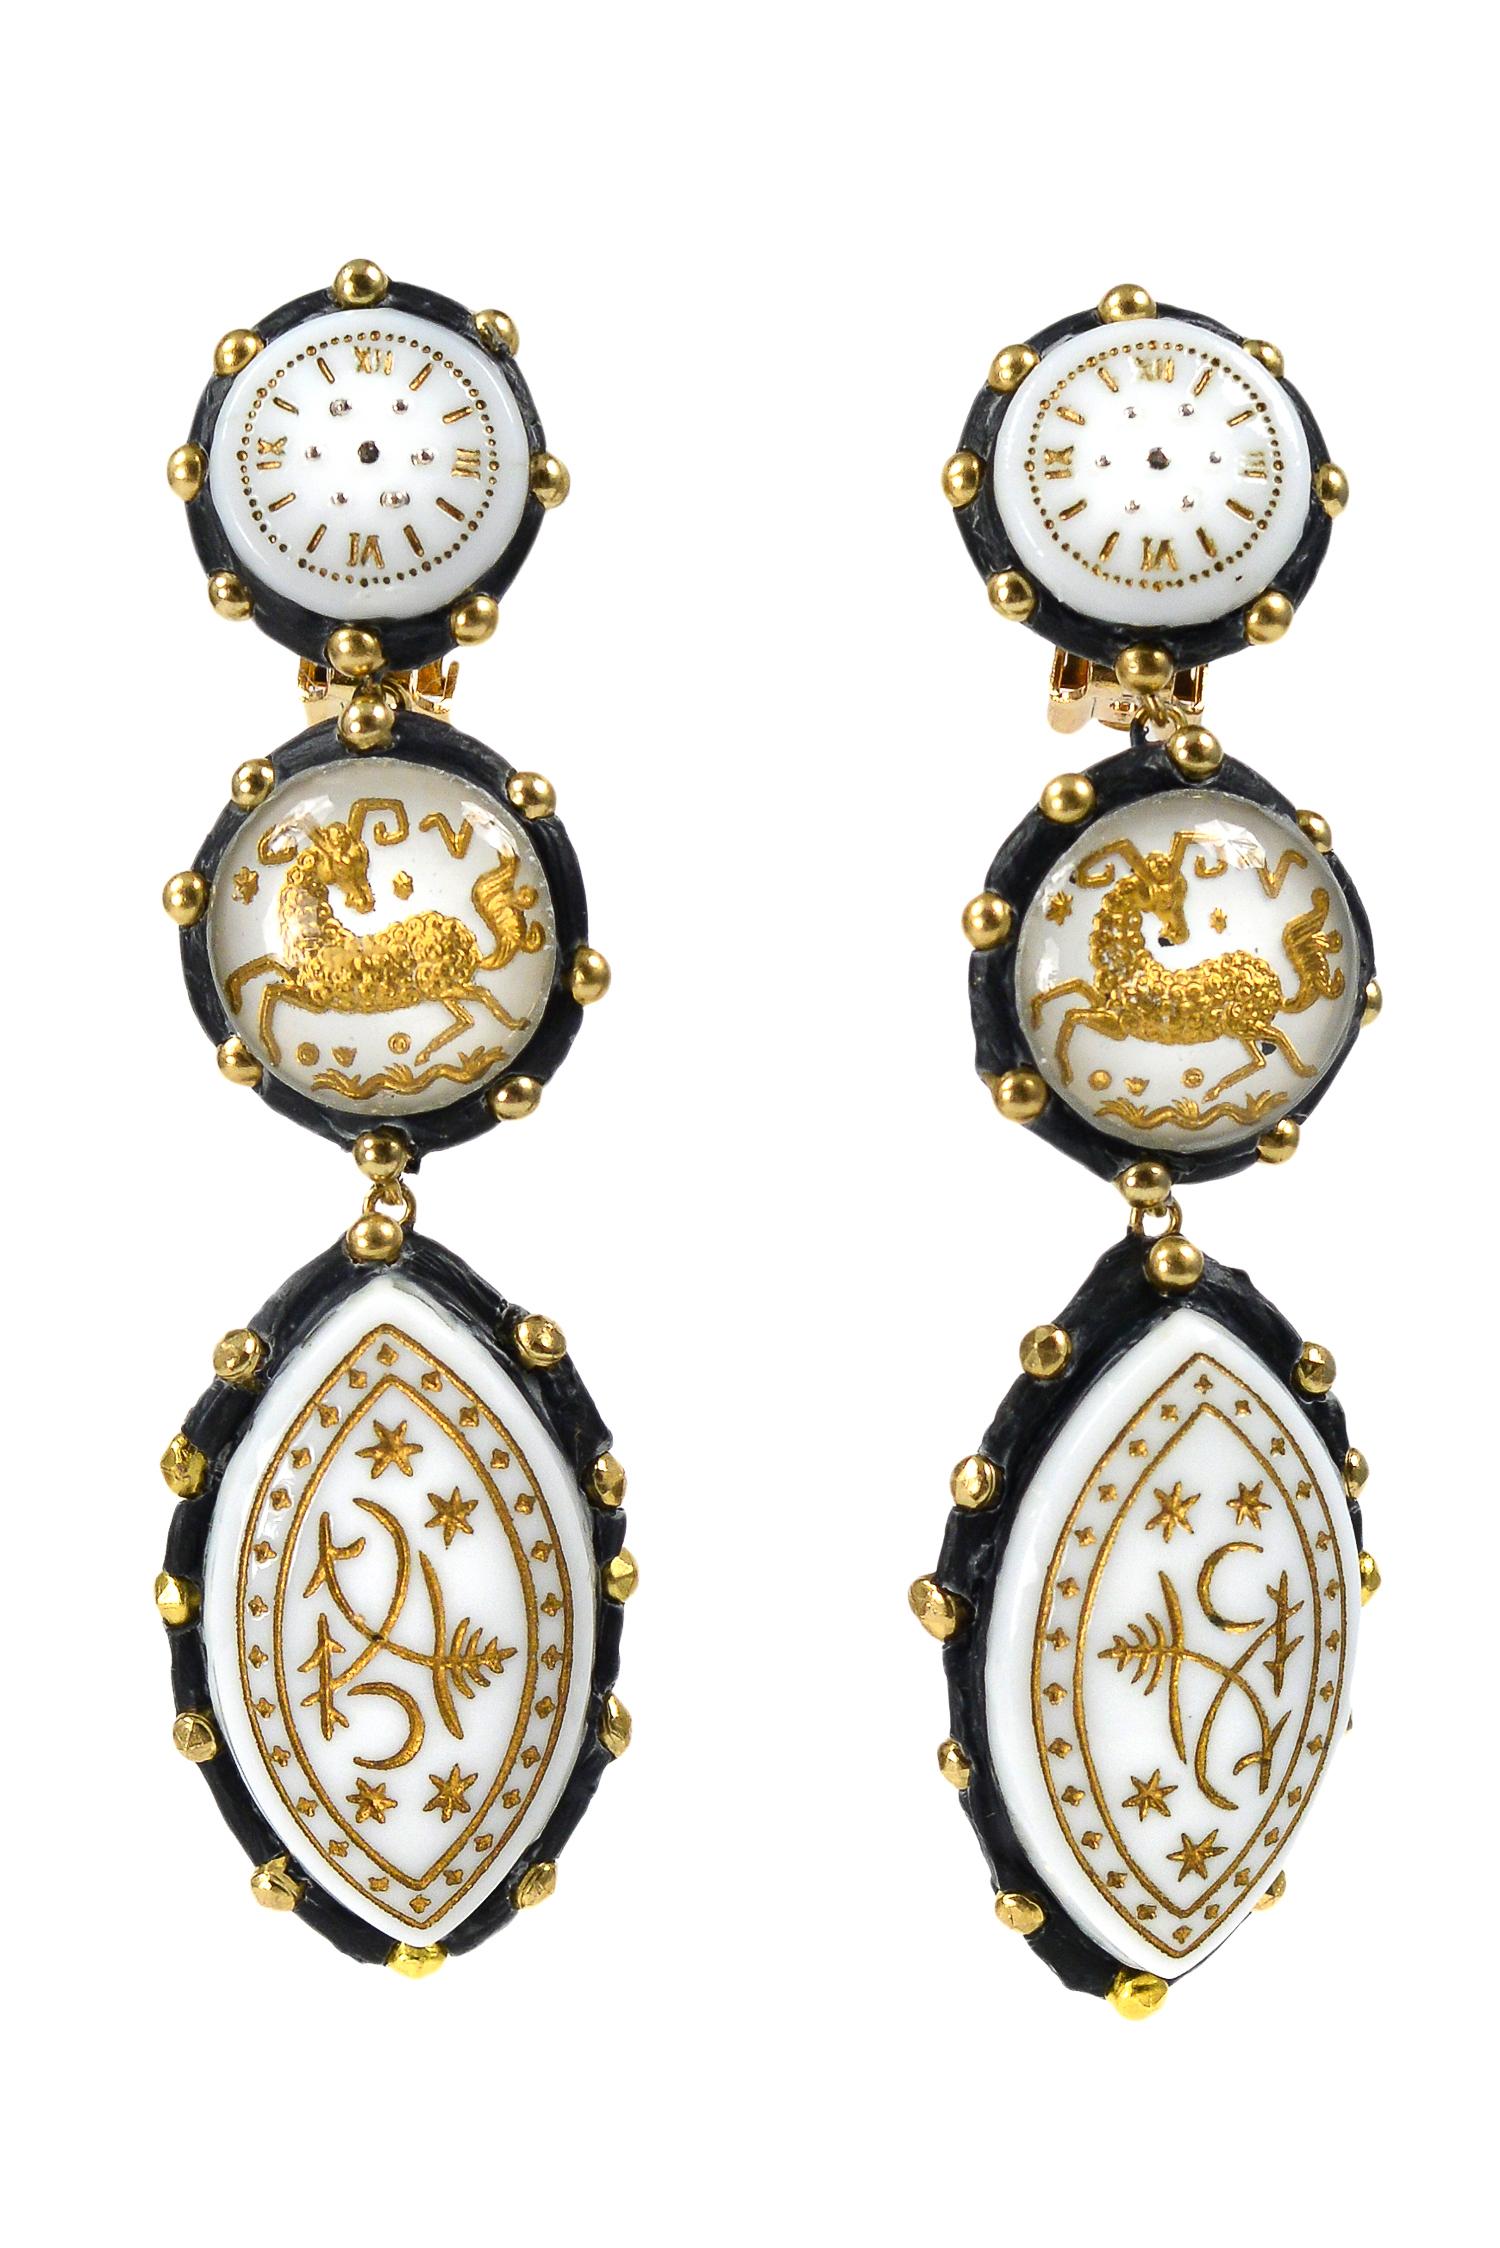 Handmade one-of-a-kind Richard Minadeo drop clip earrings with white enamel and gold etched zodiac and Capricorn symbols set in onyx resin with gold-tone studs.

We are pleased to announce Resurrected: Richard Minadeo and the art of Memento Mori: